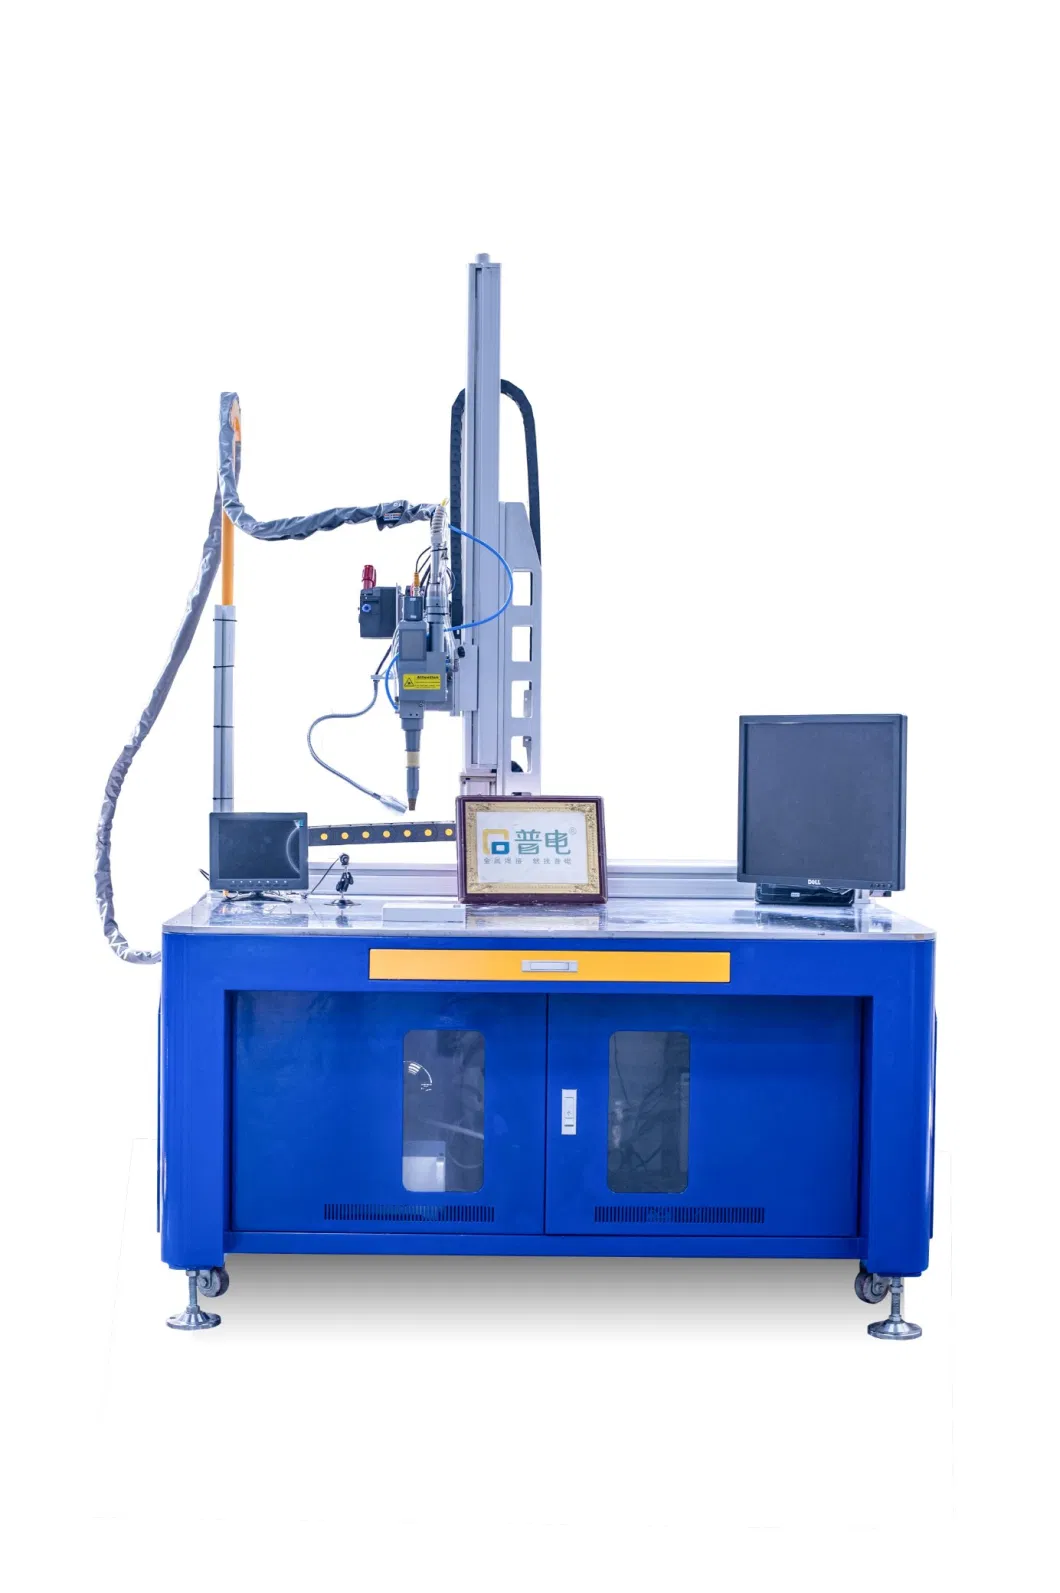 Laser Galvanometer Welder Factory Price, Multi Axis Combined Automatic 1500W/2000W Welding Machine, Spot Welding Battery Pack Cells, Metal Frame, Aluminum, Ss.